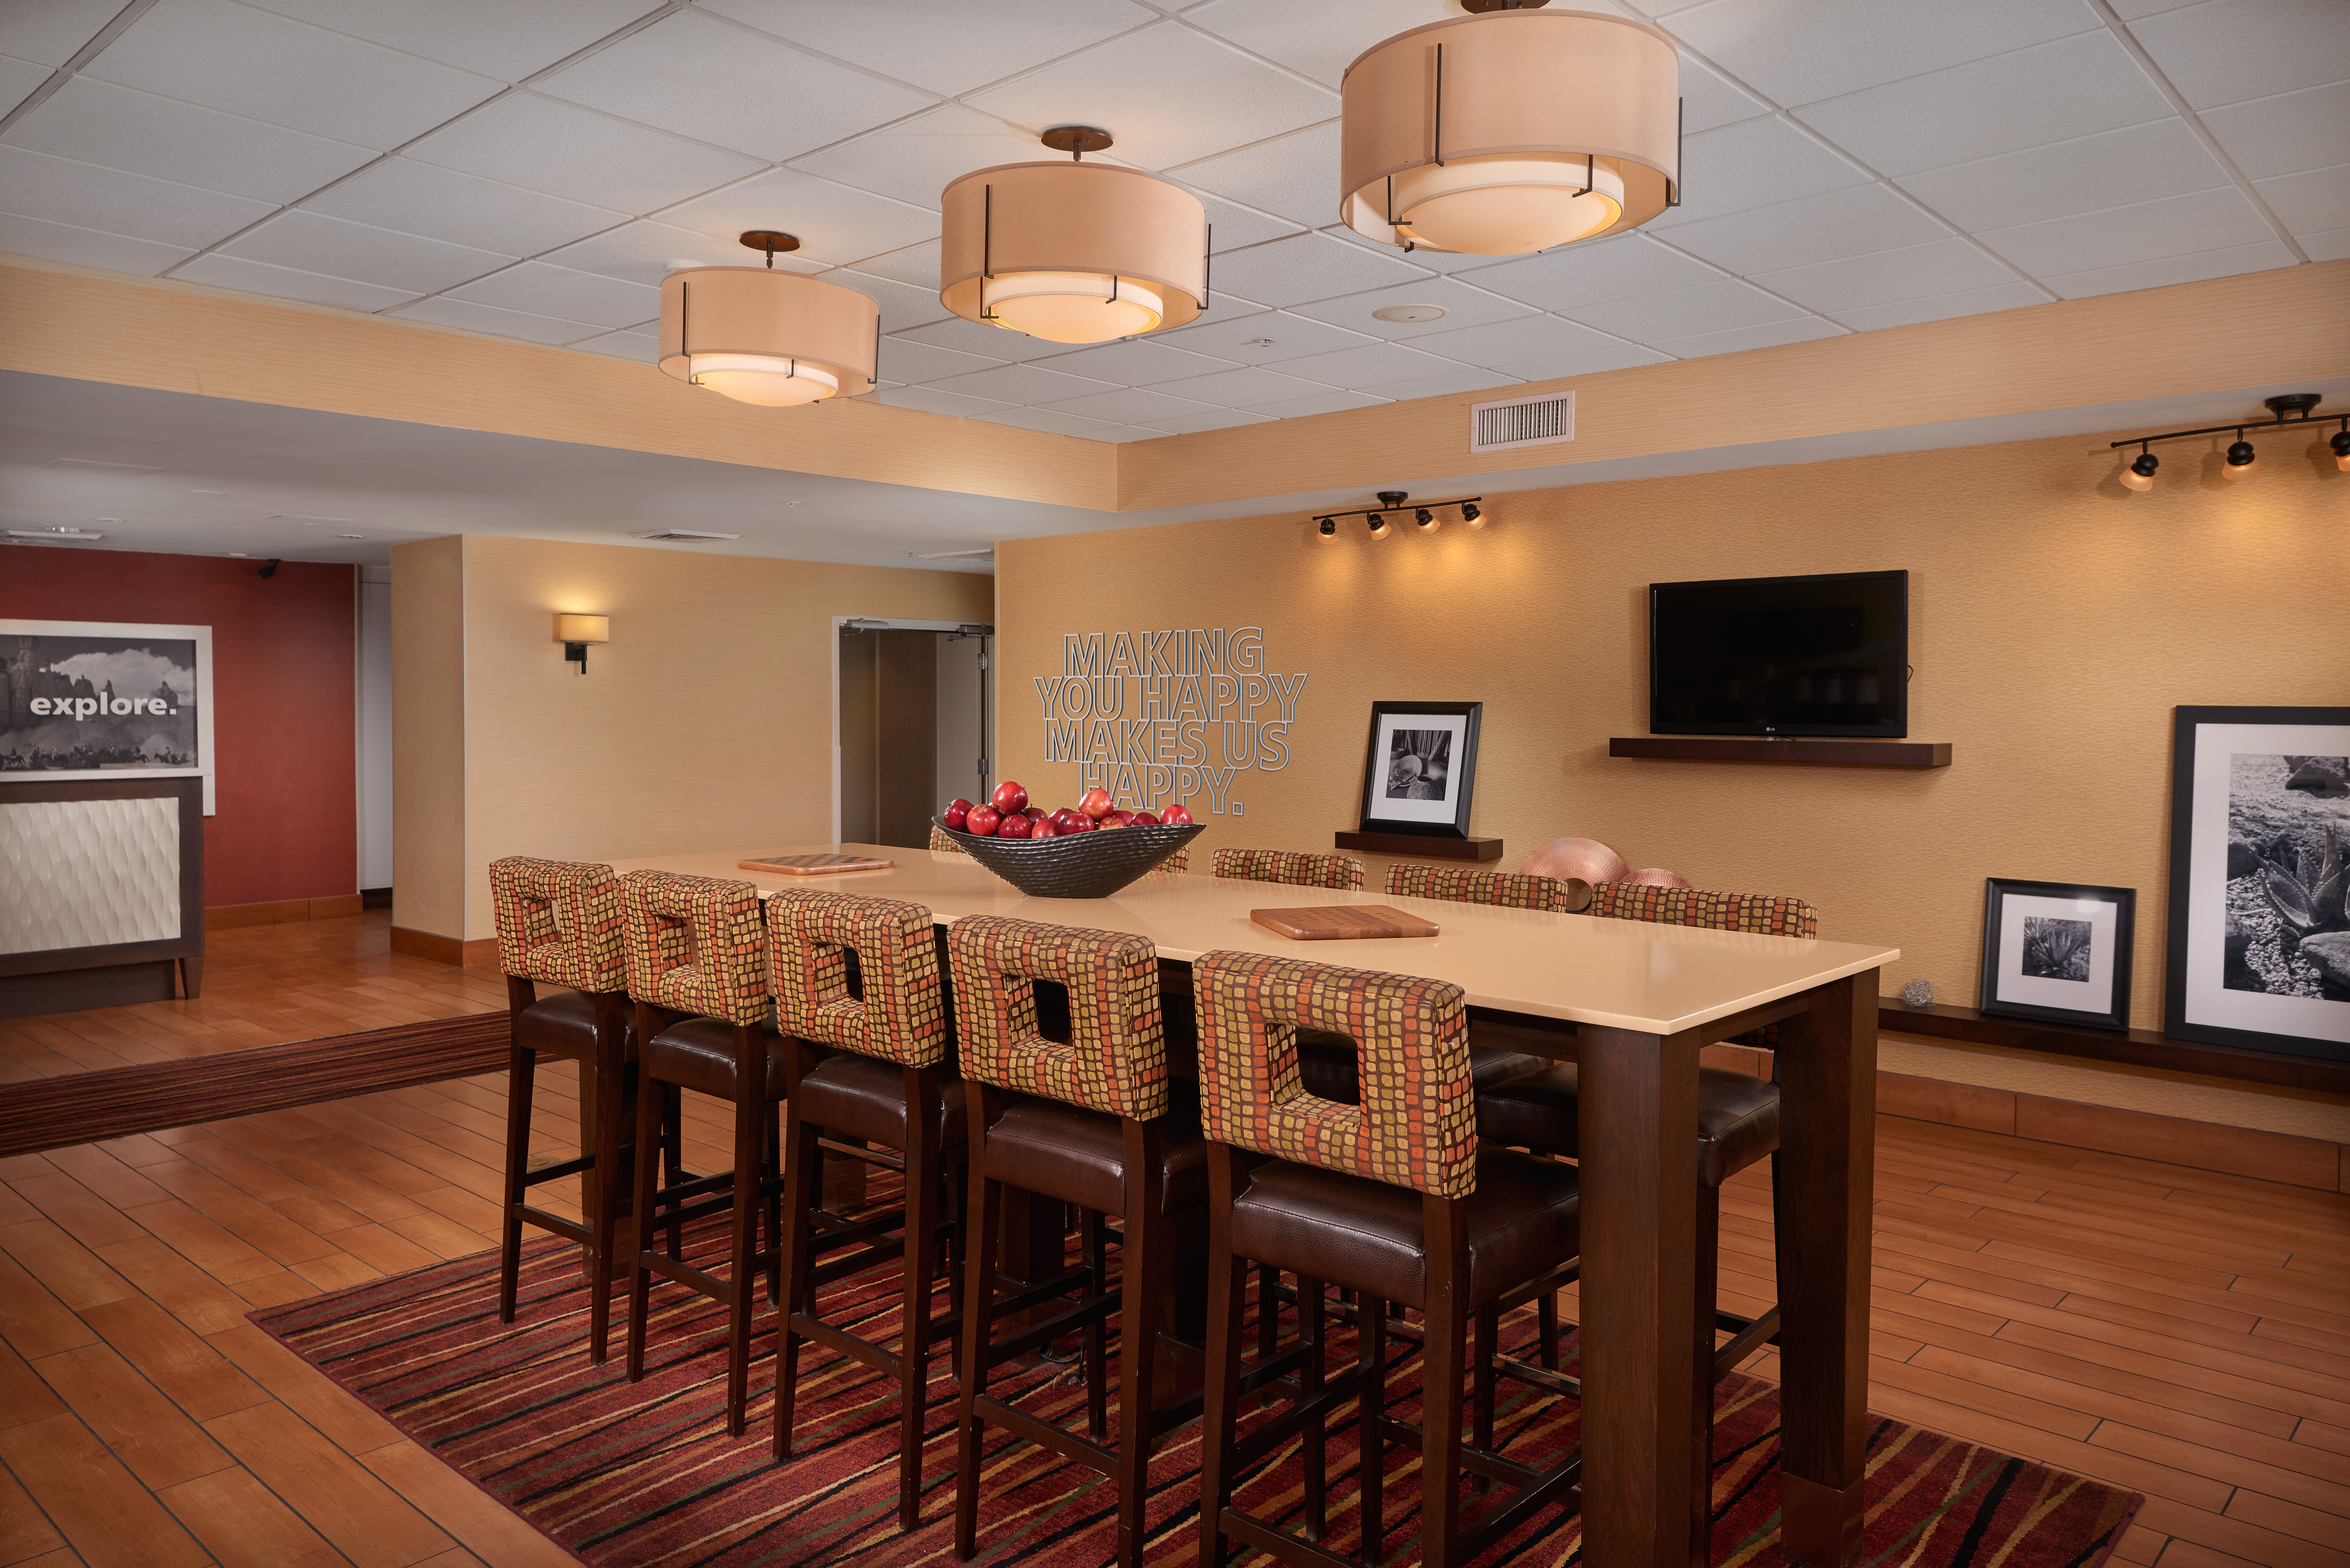 Lobby Seating Area with Tall Chairs, Tall Table and Wall Mounted HDTV